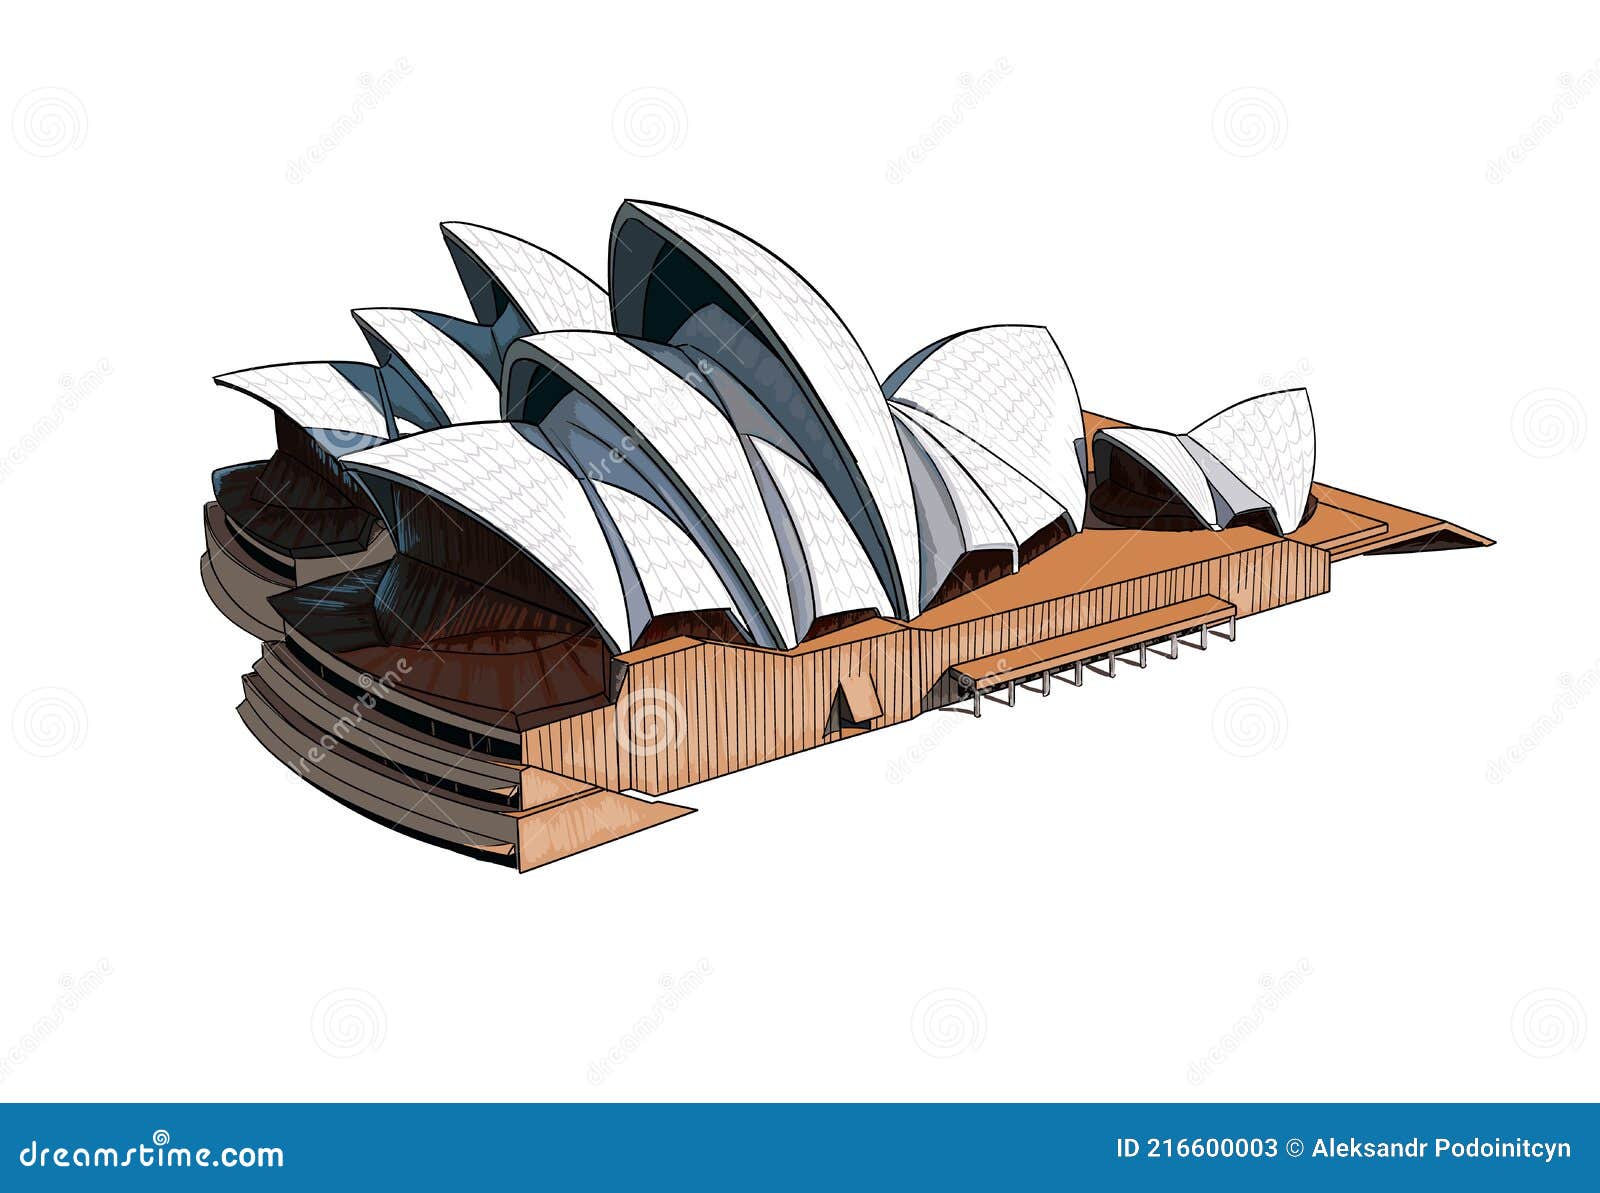 Sydney Opera House Carbon Drawing. #ariktrejos | Architecture drawing art,  Charcoal art, Architecture sketch